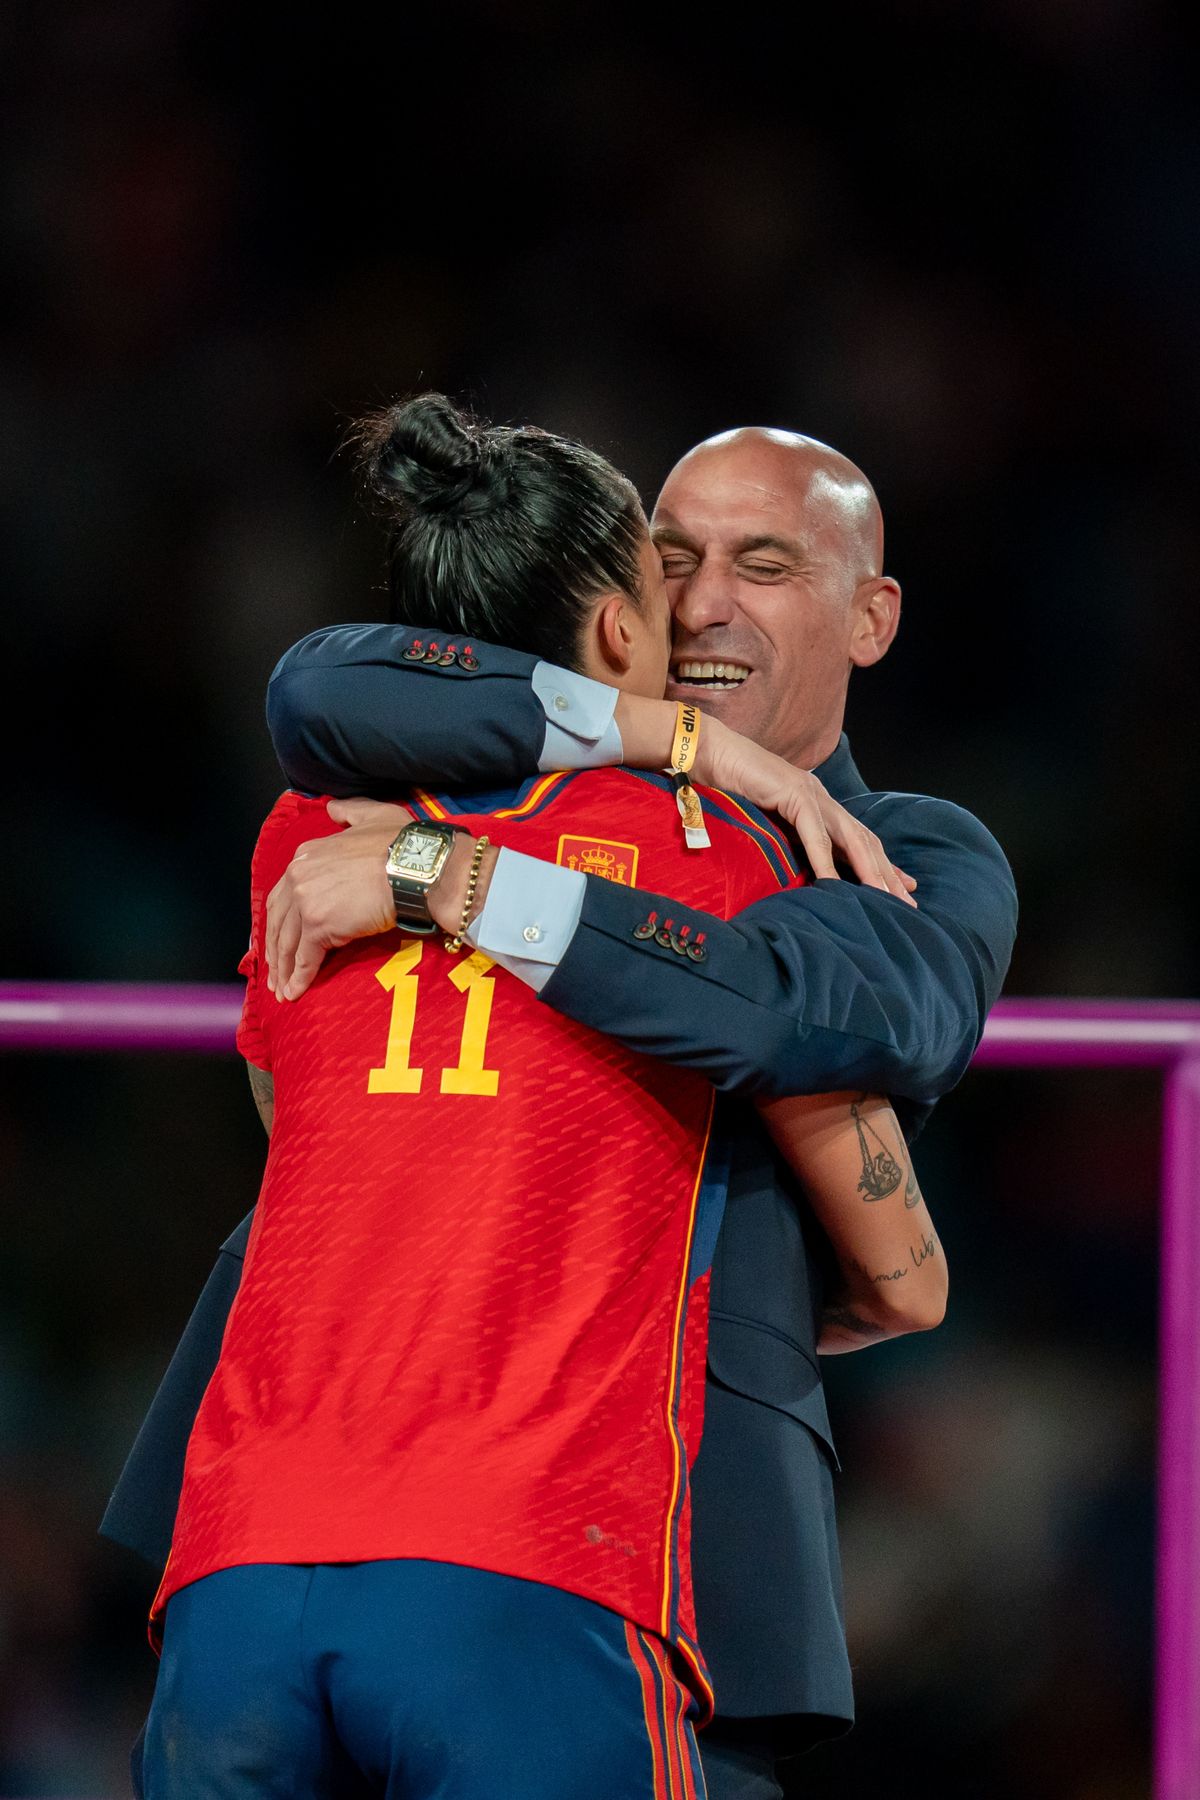 FIFA Womens World Cup 2023 Final - Spain v England - Stadium AustraliaFIFA Womens World Cup 2023 Final - Spain v England - Stadium AustraliaSydney, Australia, August 20th 2023: Jenni Hermoso (10 Spain) hugs president of the RFEF Luis Rubiales during the FIFA Womens World Cup 2023 Final football match between Spain and England at Stadium Australia in Sydney, Australia.  (Noe Llamas / SPP)